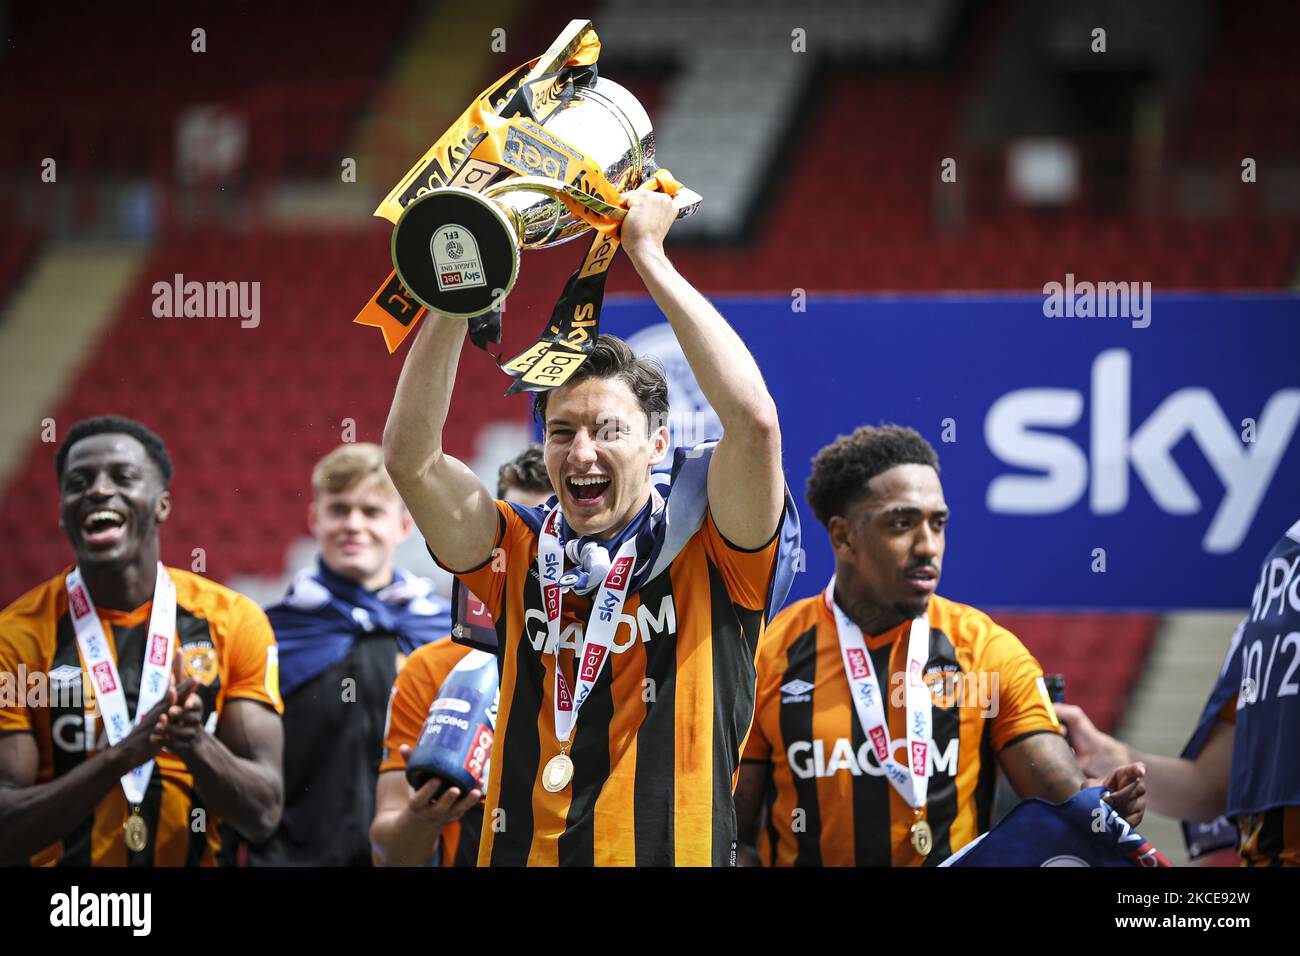 Hull City trophy celebrations during the Sky Bet League 1 match between Charlton Athletic and Hull City at The Valley, London, UK on 9th May 2021. (Photo by Tom West/MI News/NurPhoto) Stock Photo